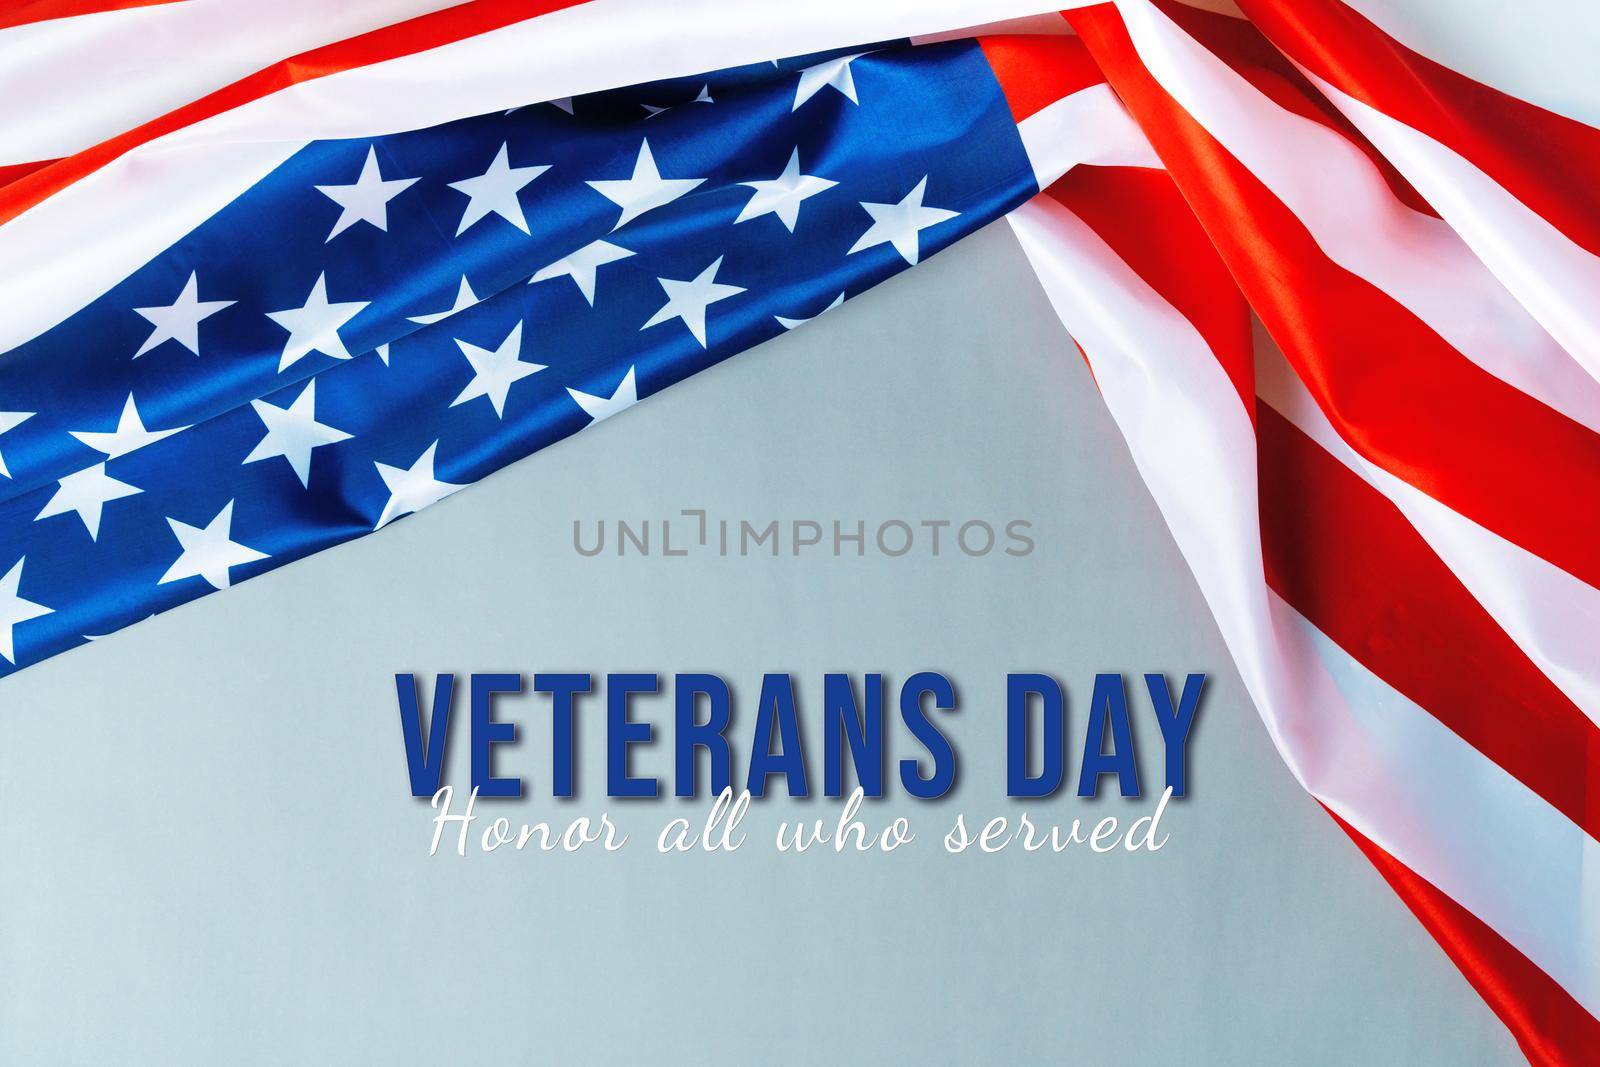 Veterans day. Honoring all who served. American flag. by psodaz